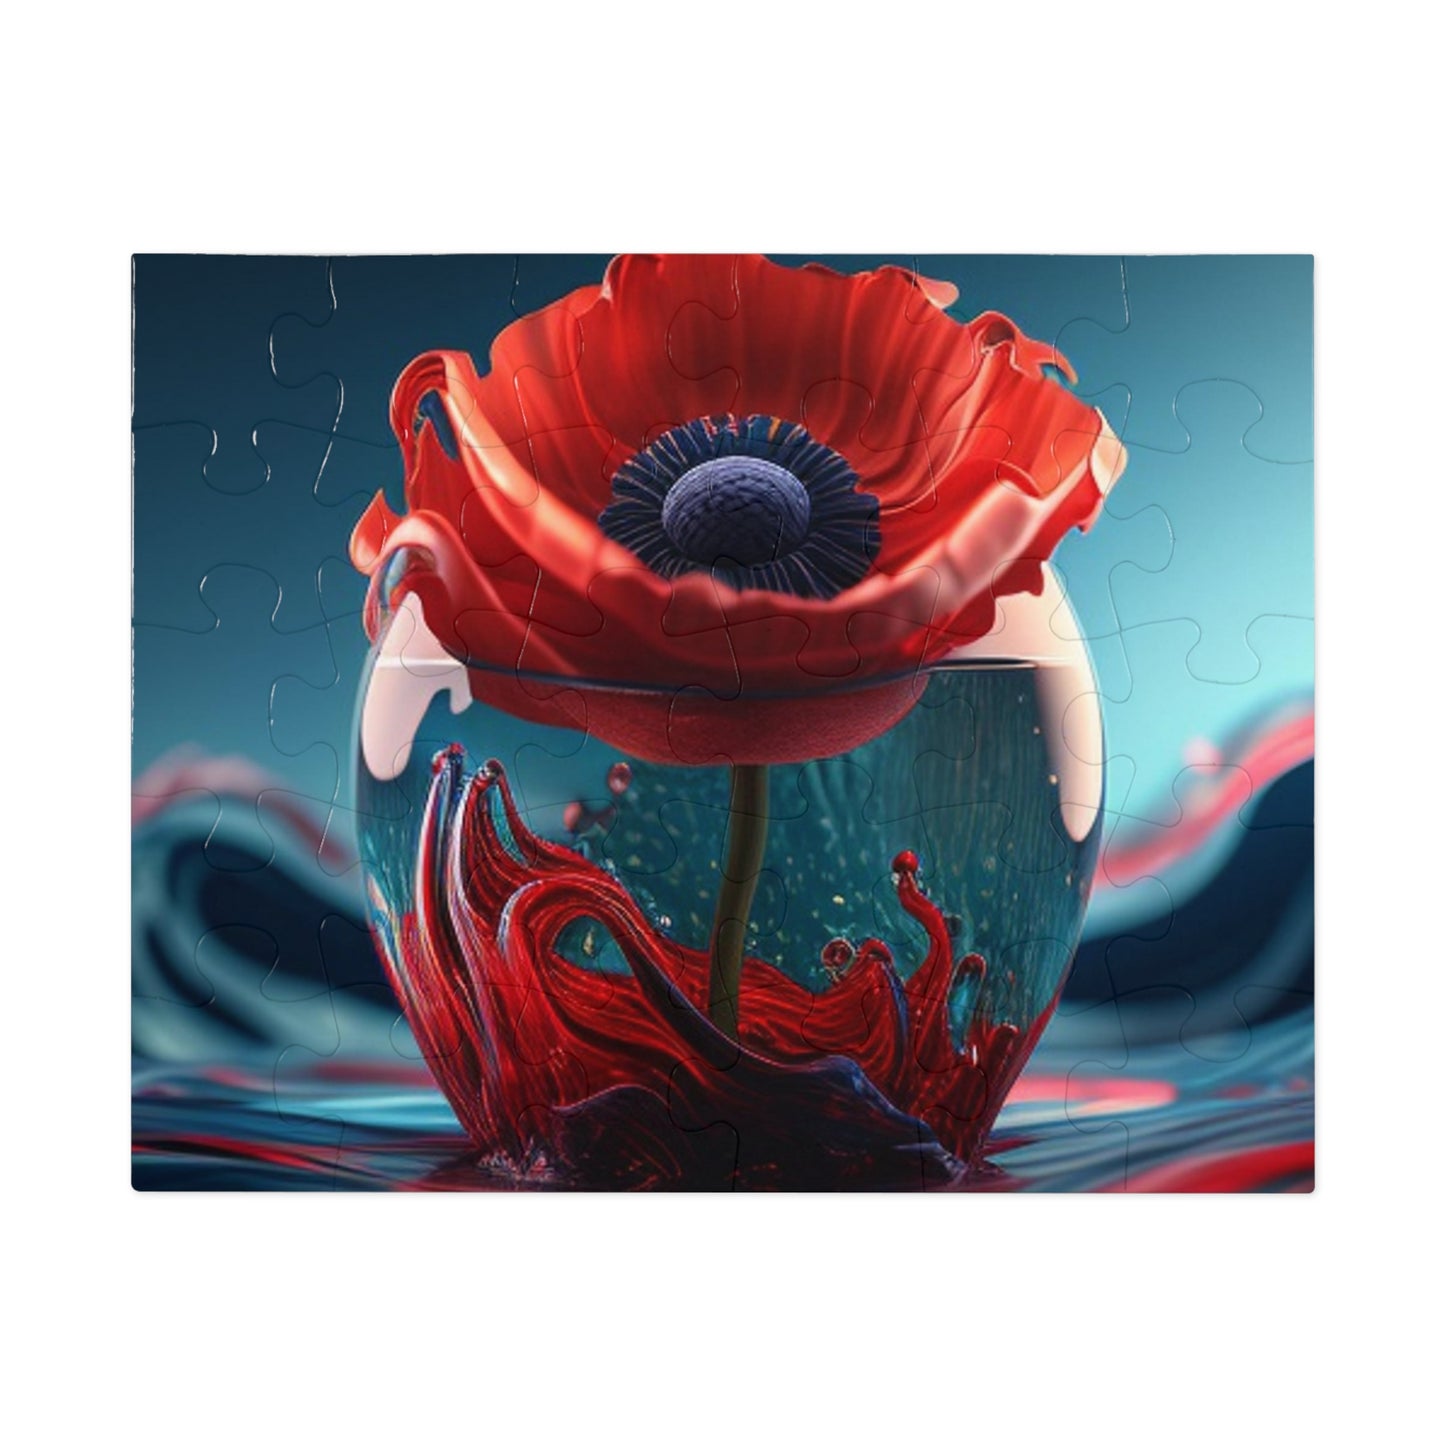 Jigsaw Puzzle (30, 110, 252, 500,1000-Piece) Red Anemone in a Vase 2